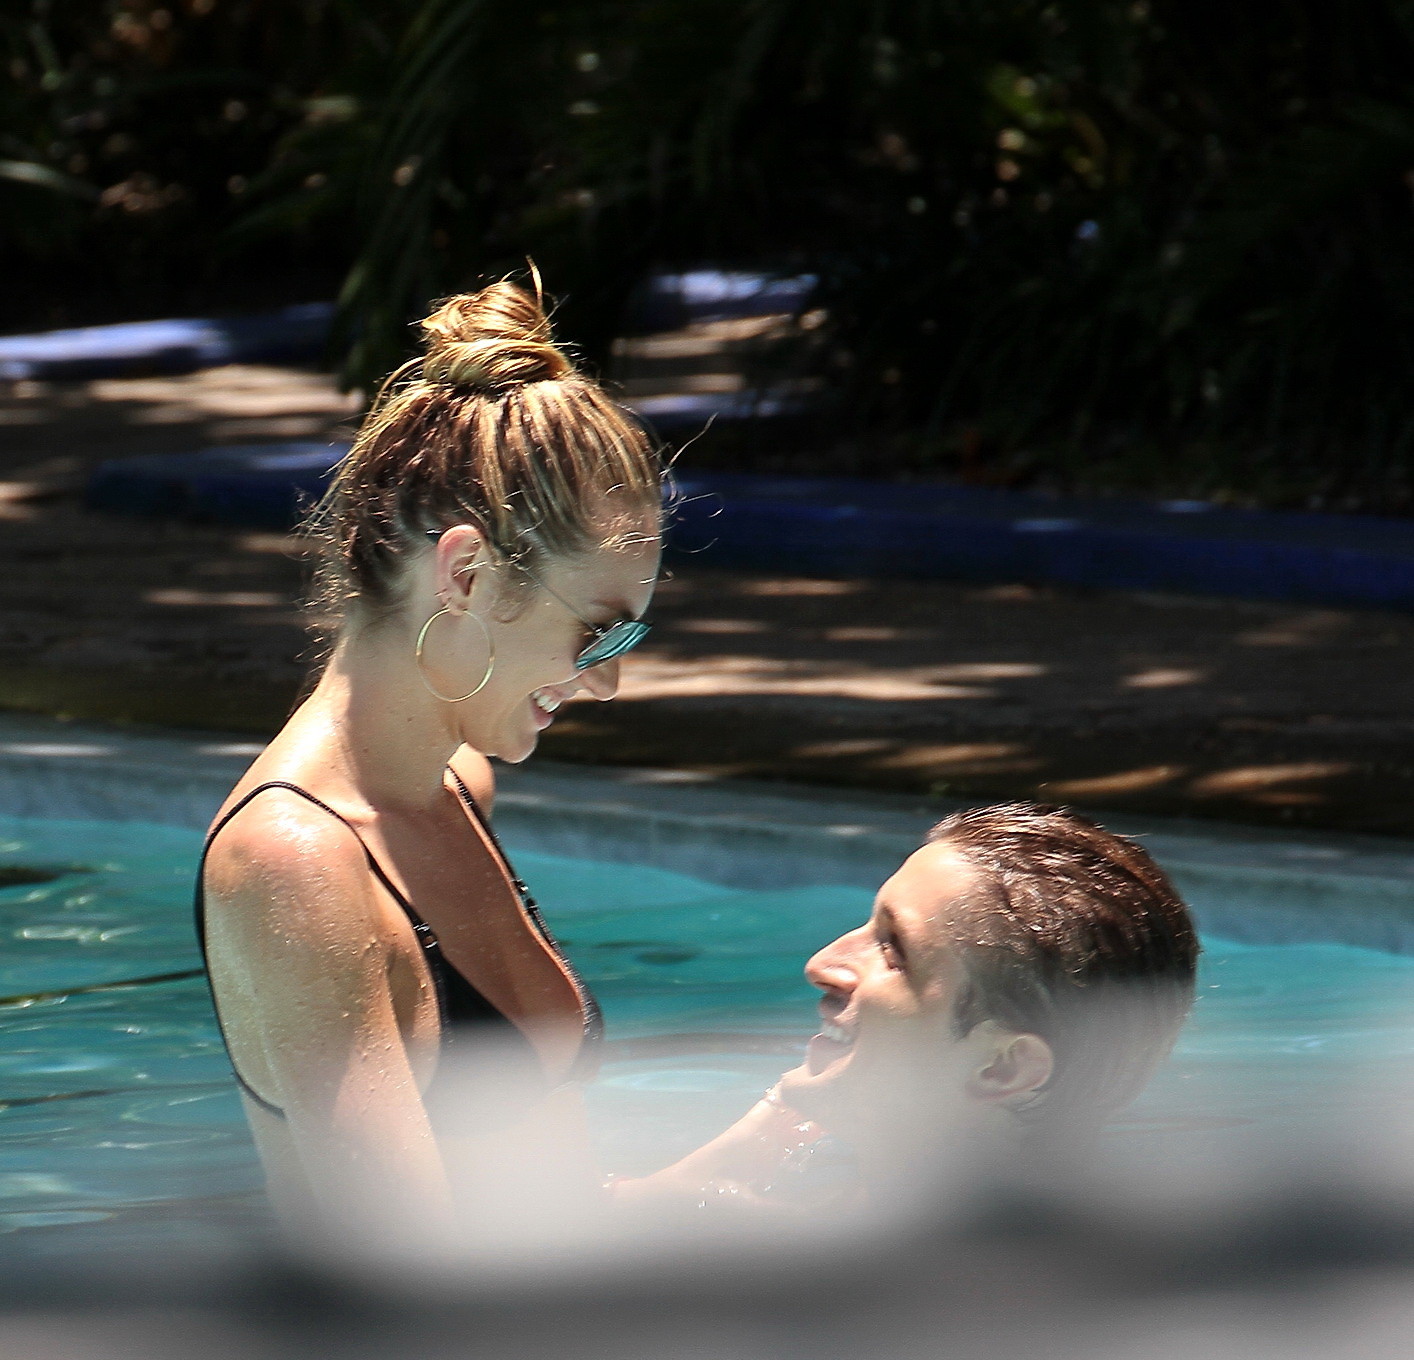 Candice Swanepoel in sexy black bikini petting with her boyfriend at the pool in #75231103